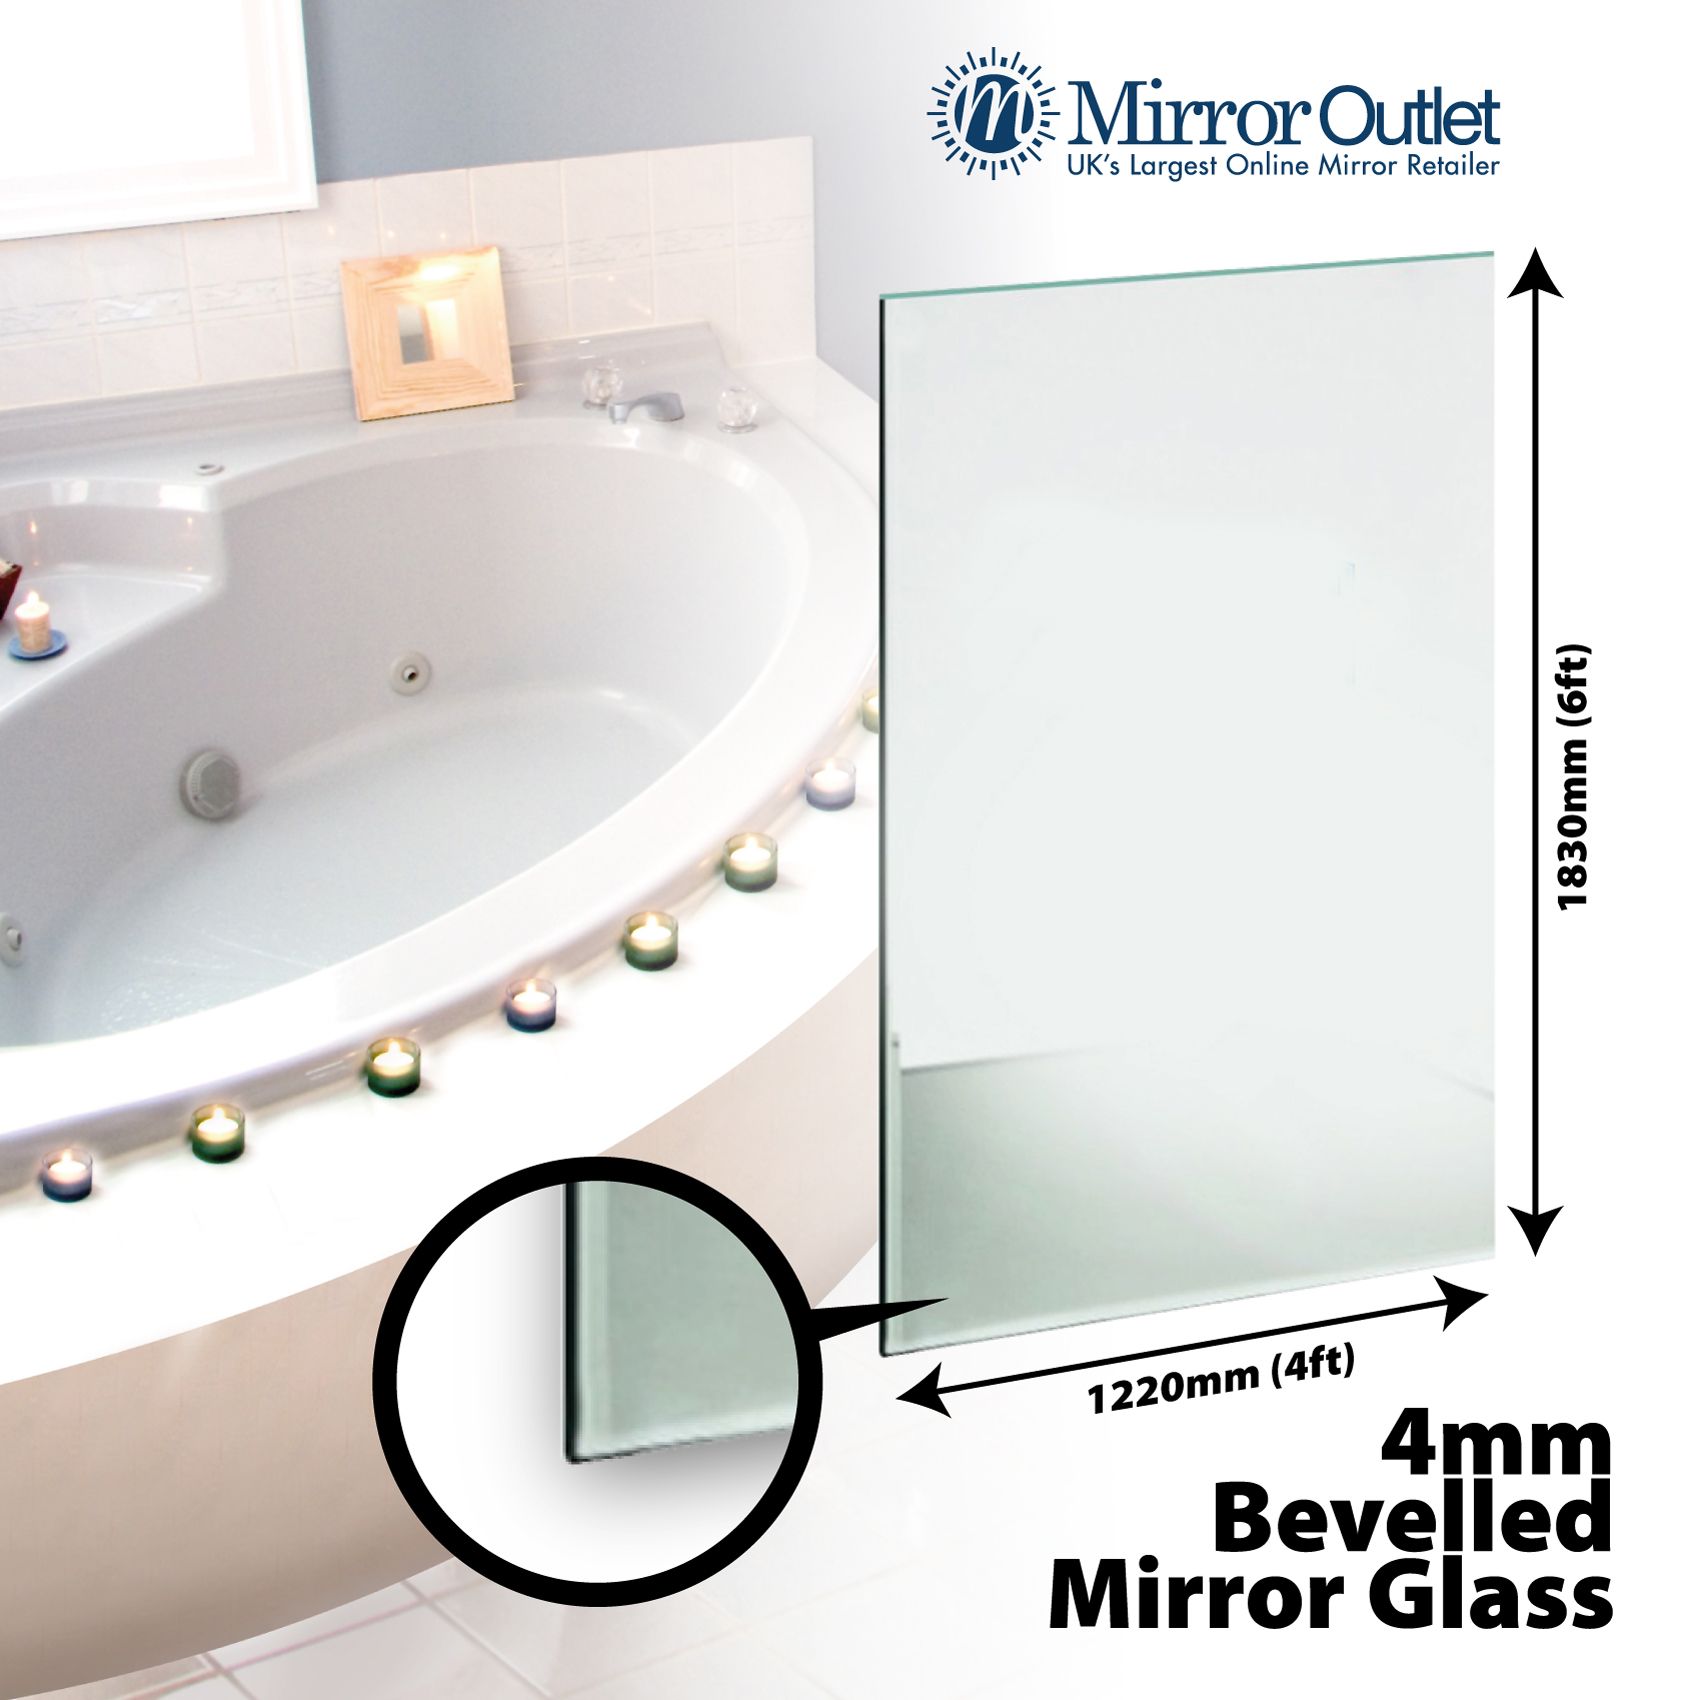 Large Bevelled Bathroom Mirror Glass, How Much Does Mirror Glass Cost Uk